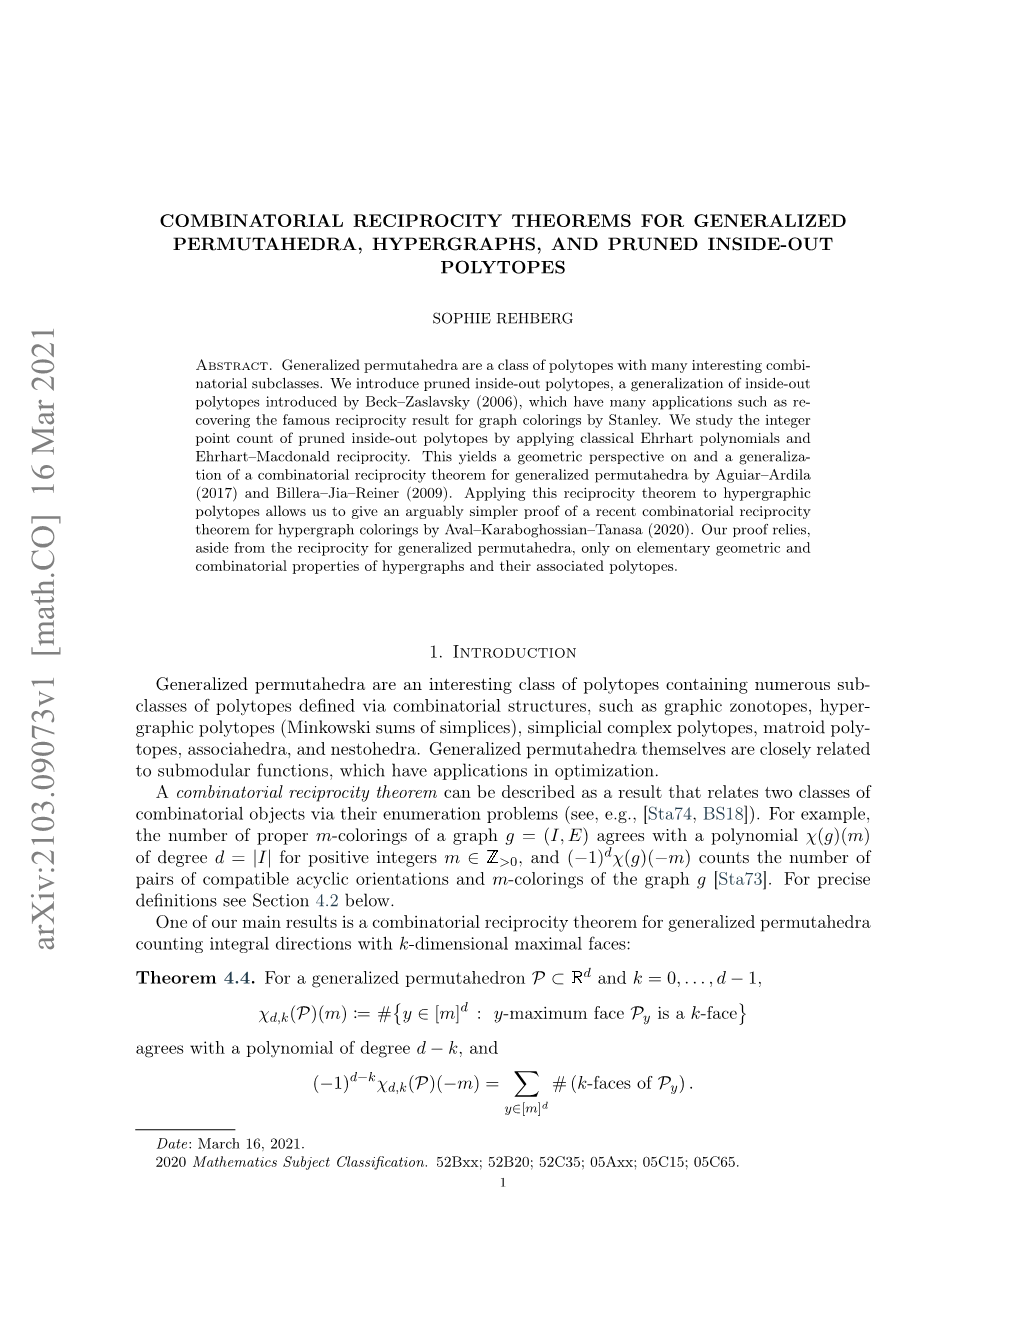 Arxiv:2103.09073V1 [Math.CO] 16 Mar 2021 Counting Integral Directions with K-Dimensional Maximal Faces: Theorem 4.4